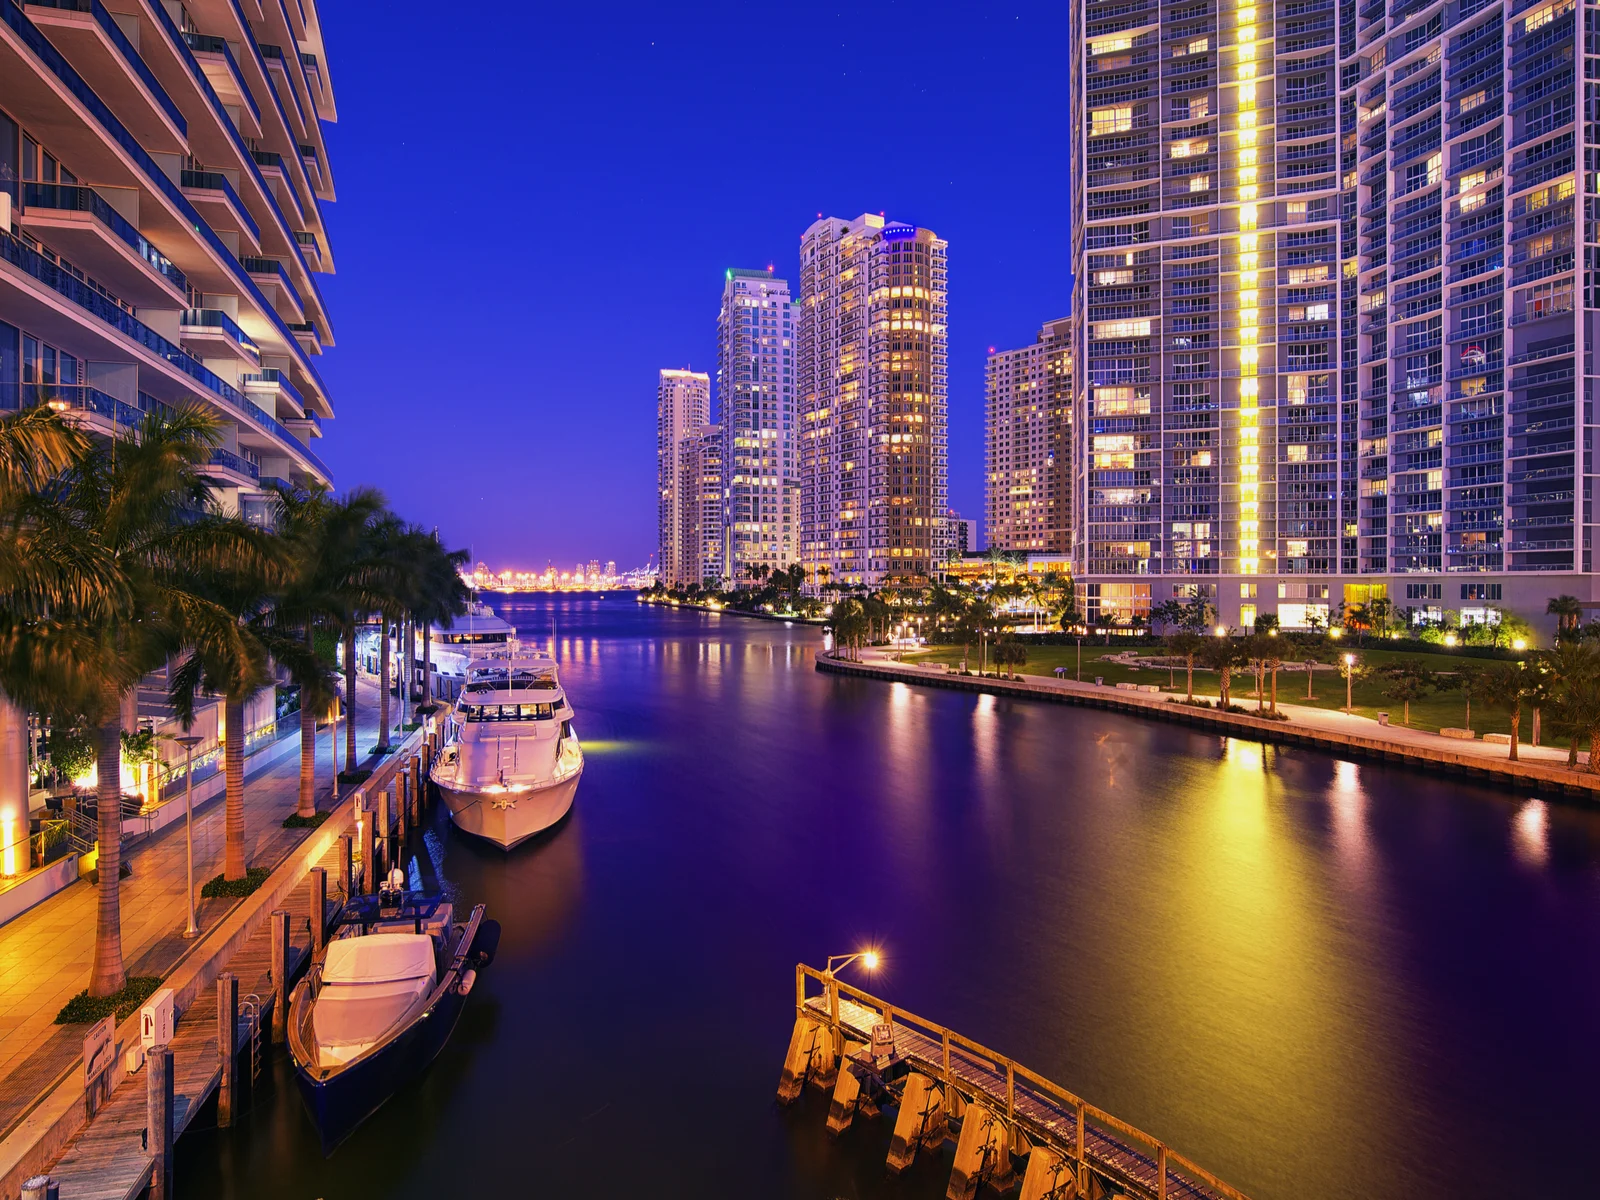 Night view of the canal between large buildings during the least busy time to visit Miami